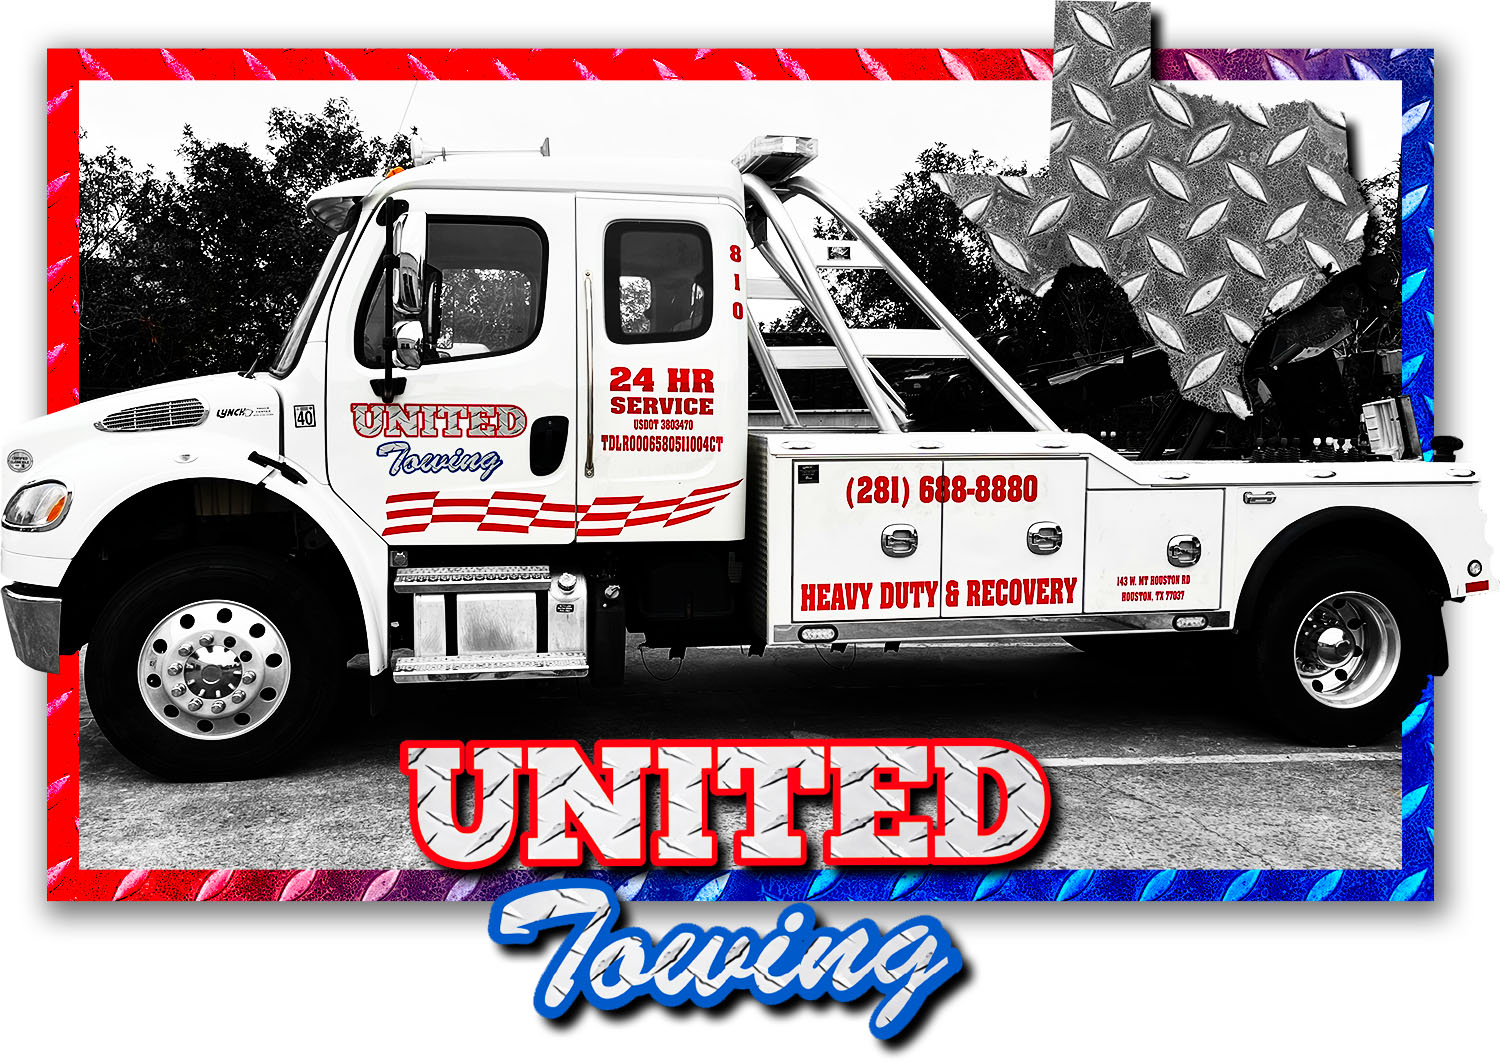 Request Service | United Towing Service